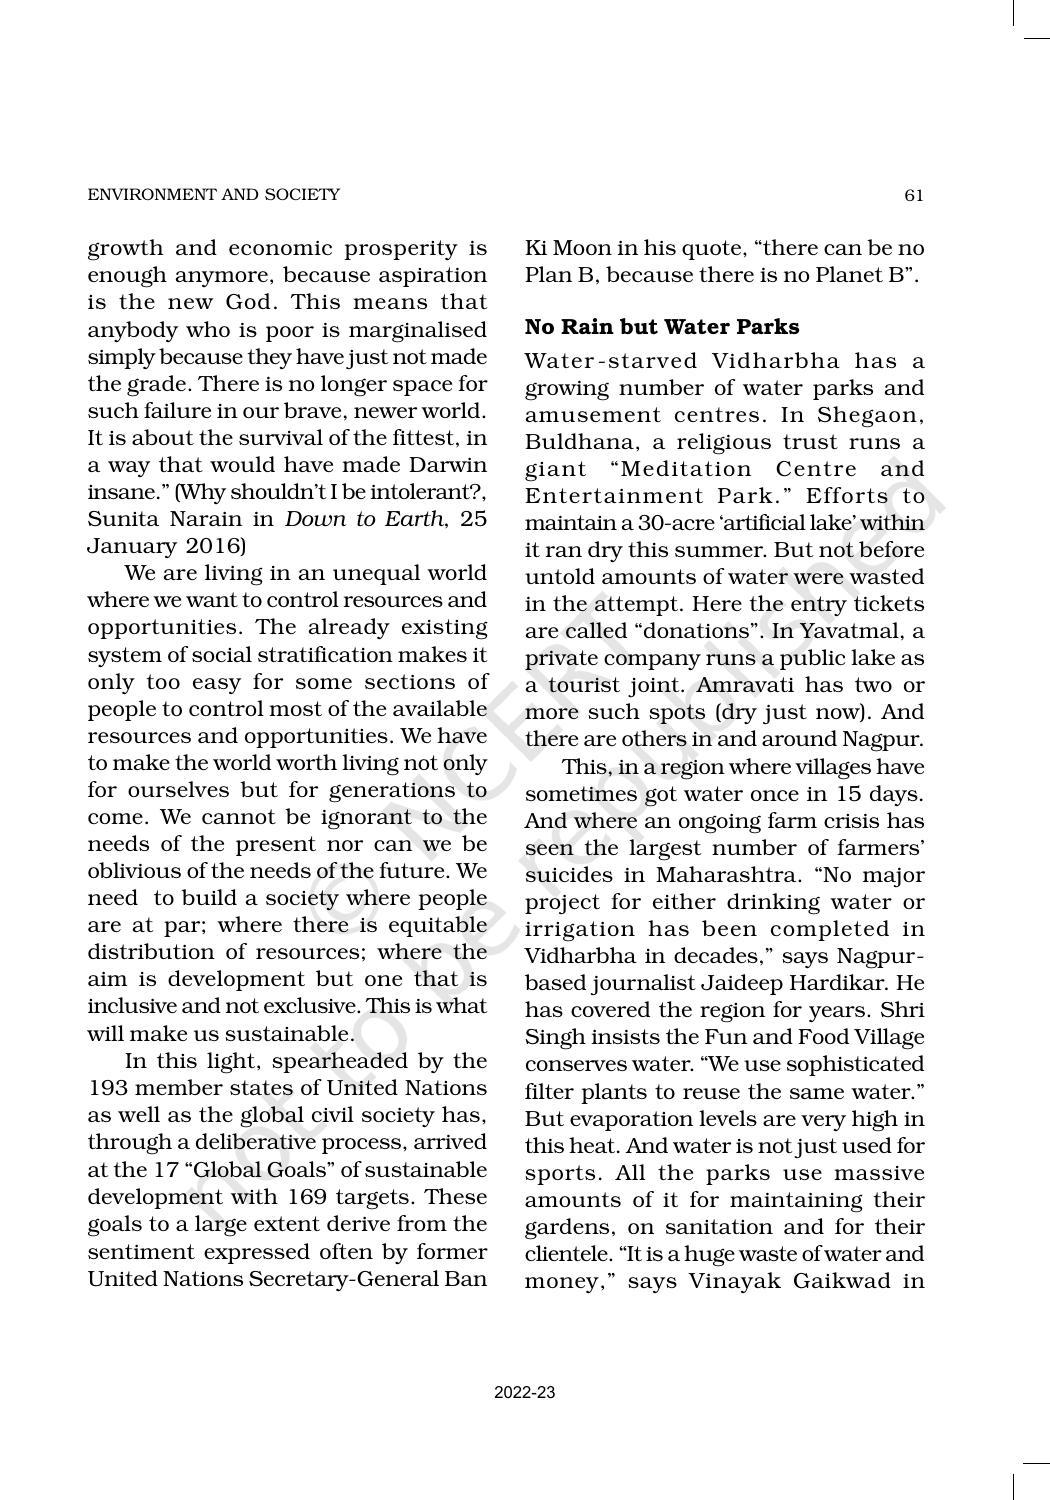 NCERT Book for Class 11 Sociology (Part-II) Chapter 3 Environment and Society - Page 12